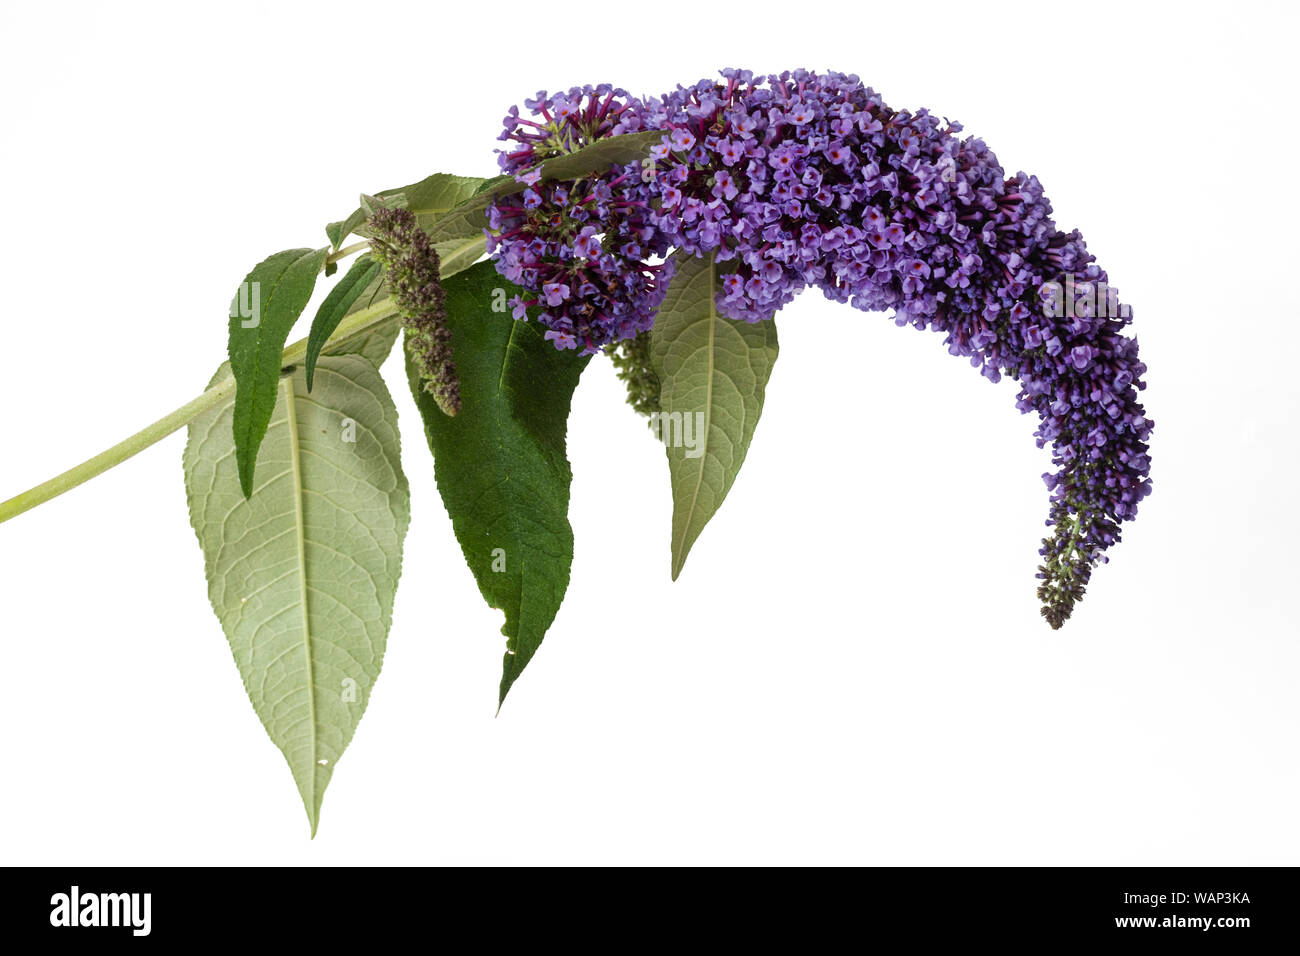 Purple flowers in the panicle of the invasive naturalised butterfy bush, Buddleja davidii, on a white background Stock Photo